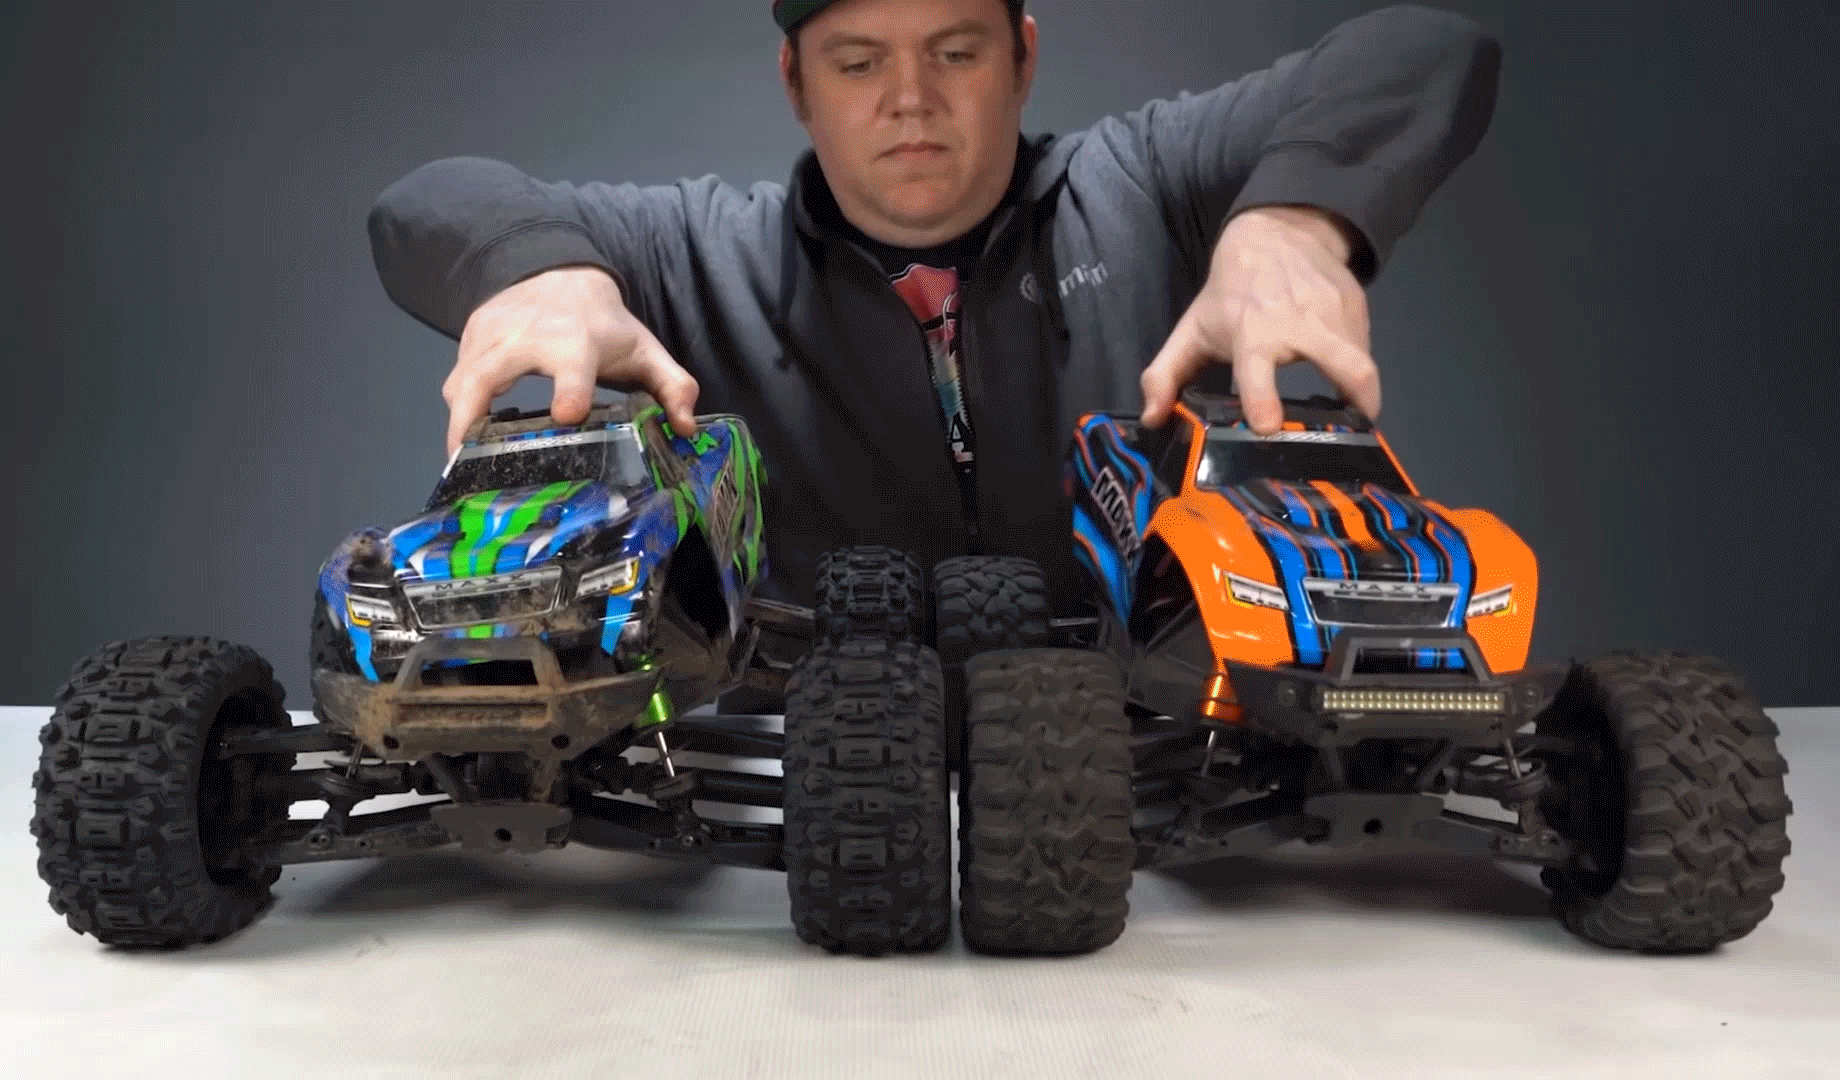 Traxxas Maxx Bodies Are Not Cross-Compatible